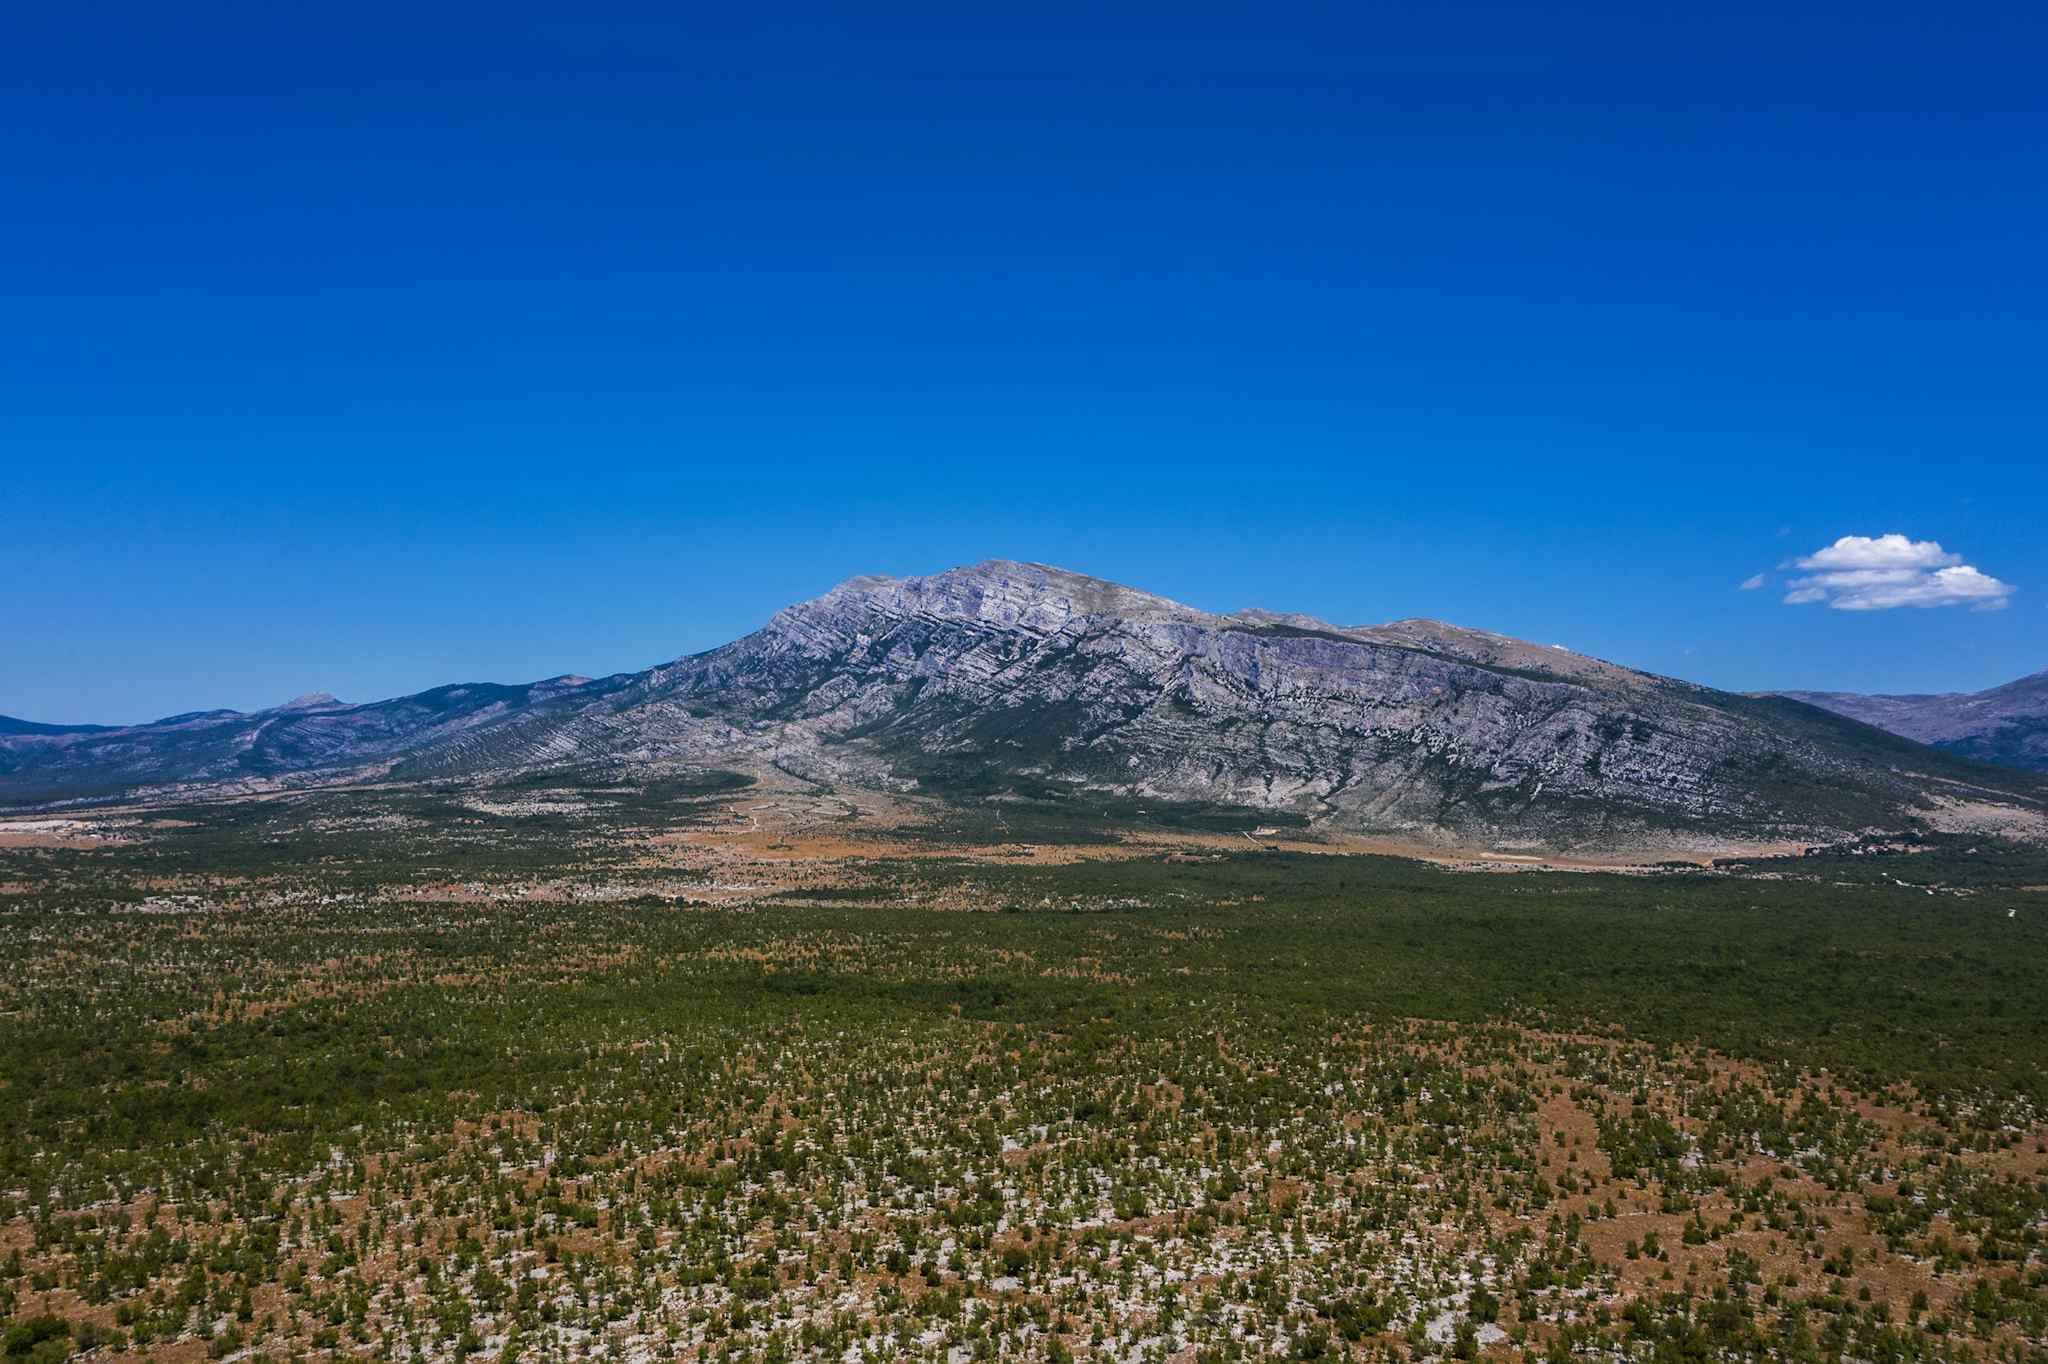 Sinjal or Dinara (1831 m) mountain - the highest point of Croatia in the Dinaric Alps on the border between the Republic of Croatia and Bosnia and Herzegovina